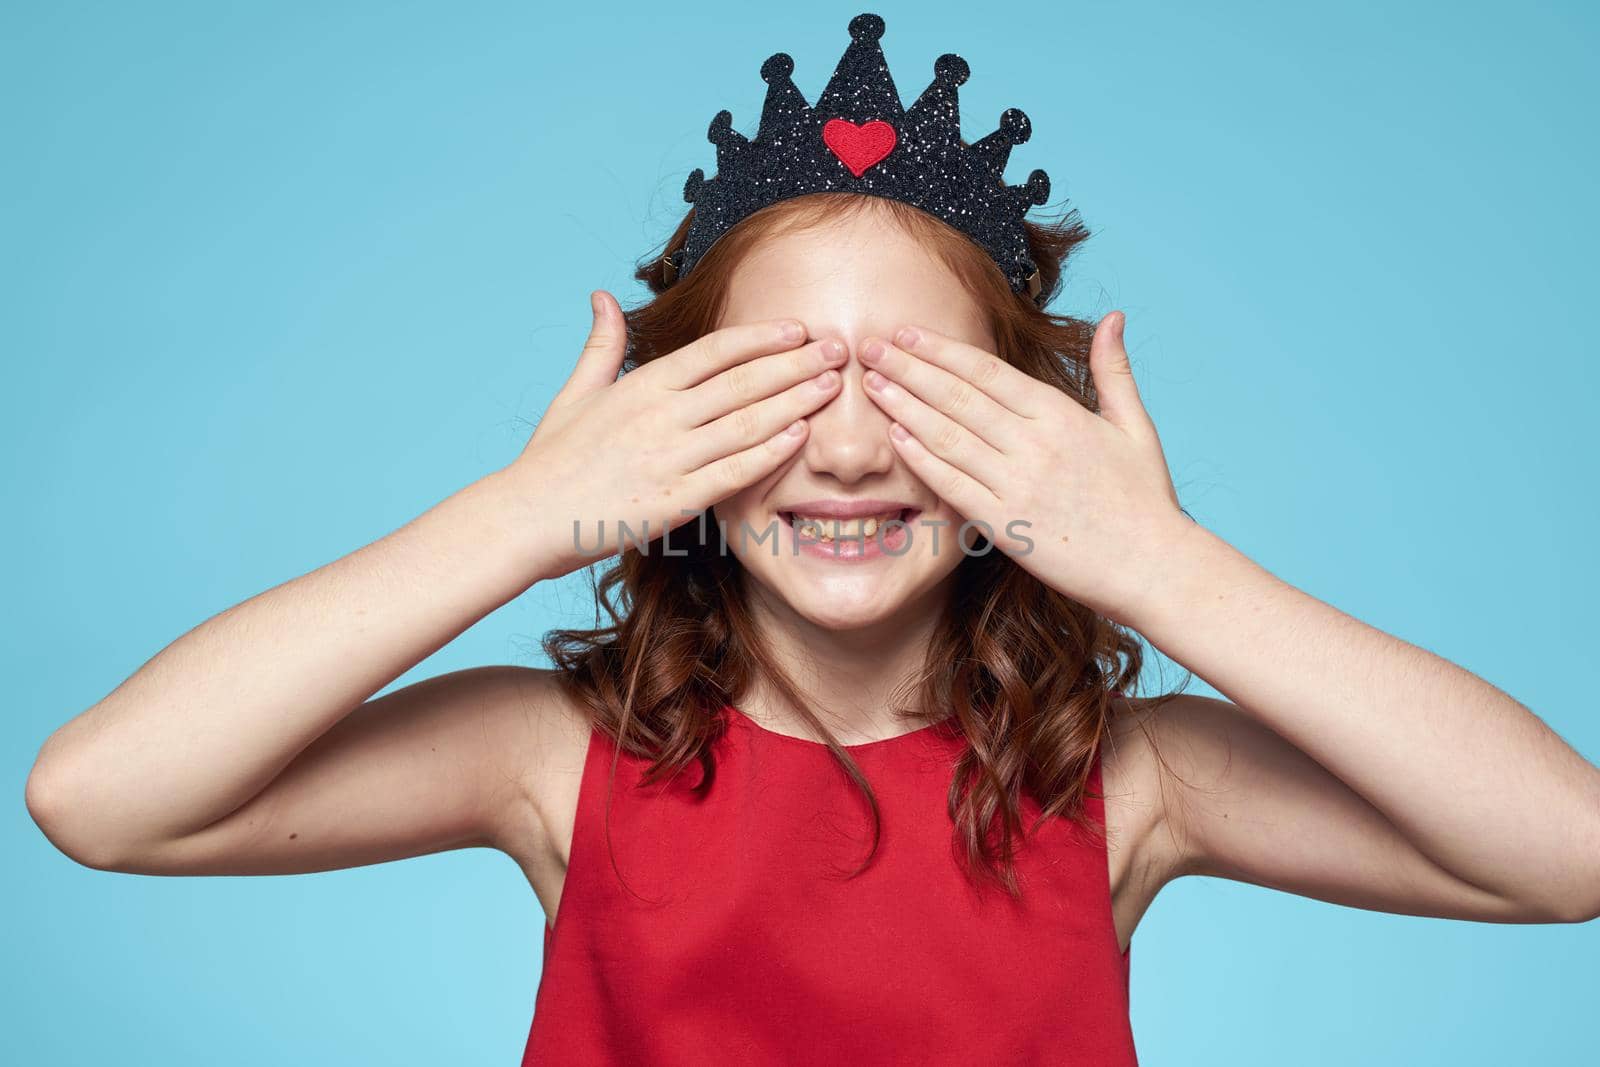 Girl with curly hair with a crown on her head red dress lifestyle blue background by SHOTPRIME